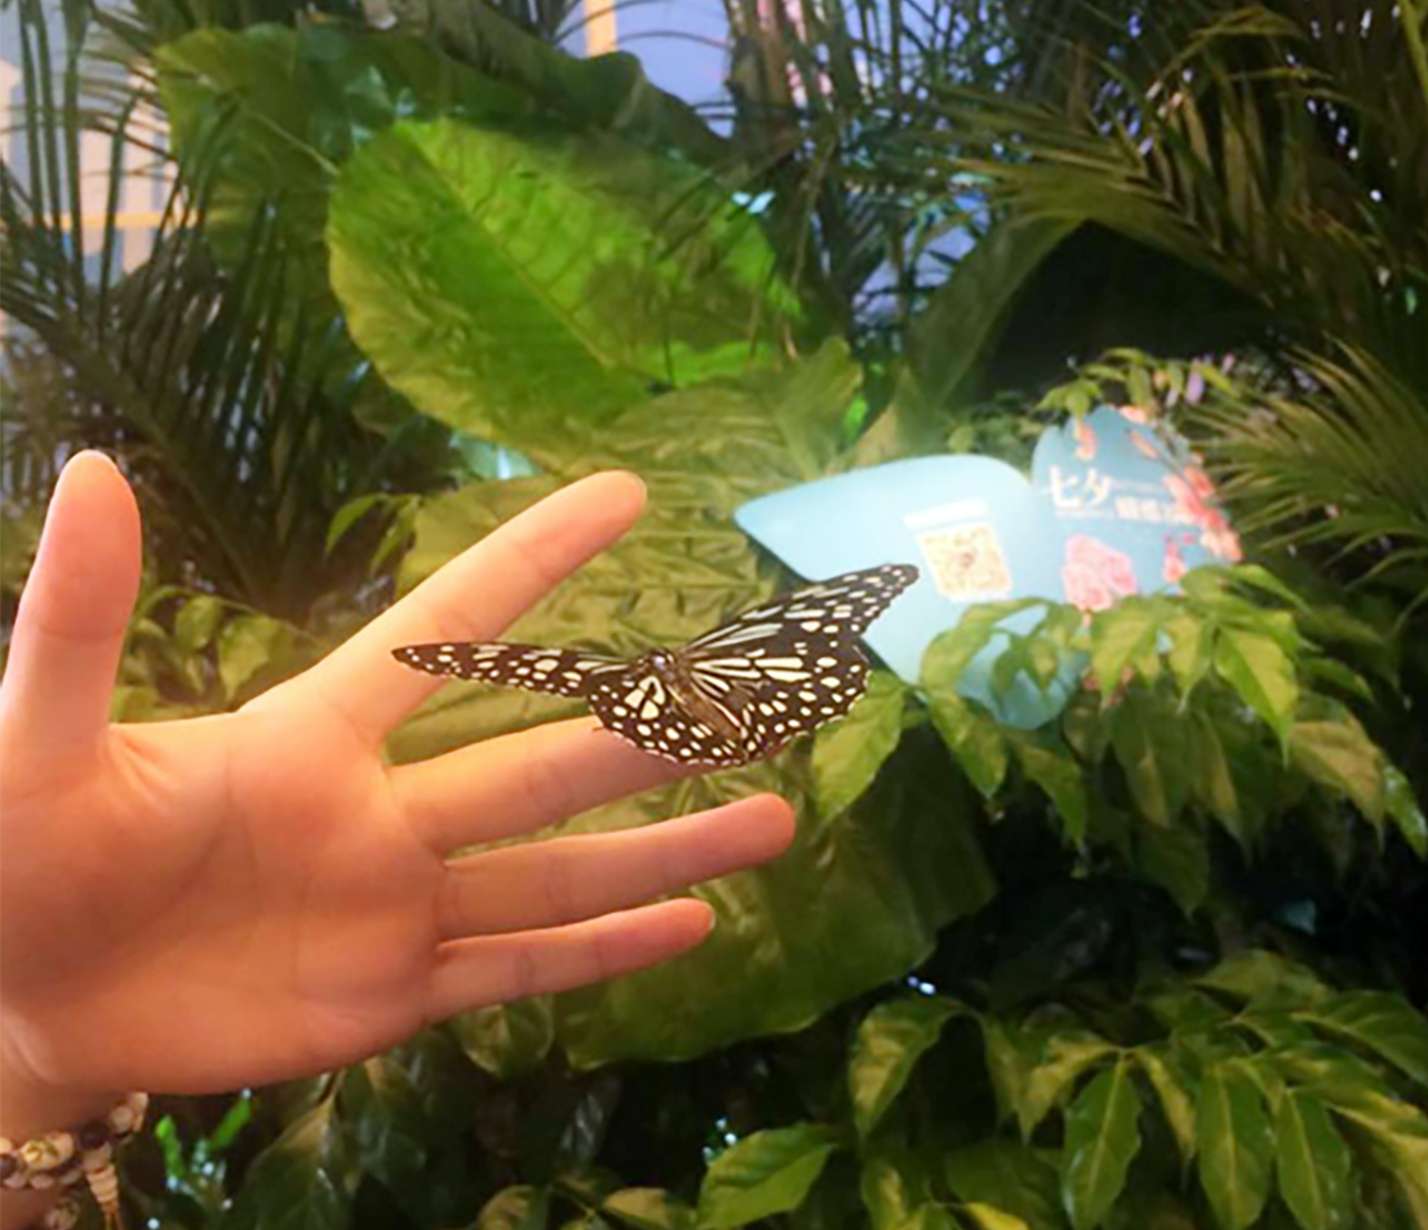 A visitor handles a butterfly at the mall. Photo: SCMP Pictures